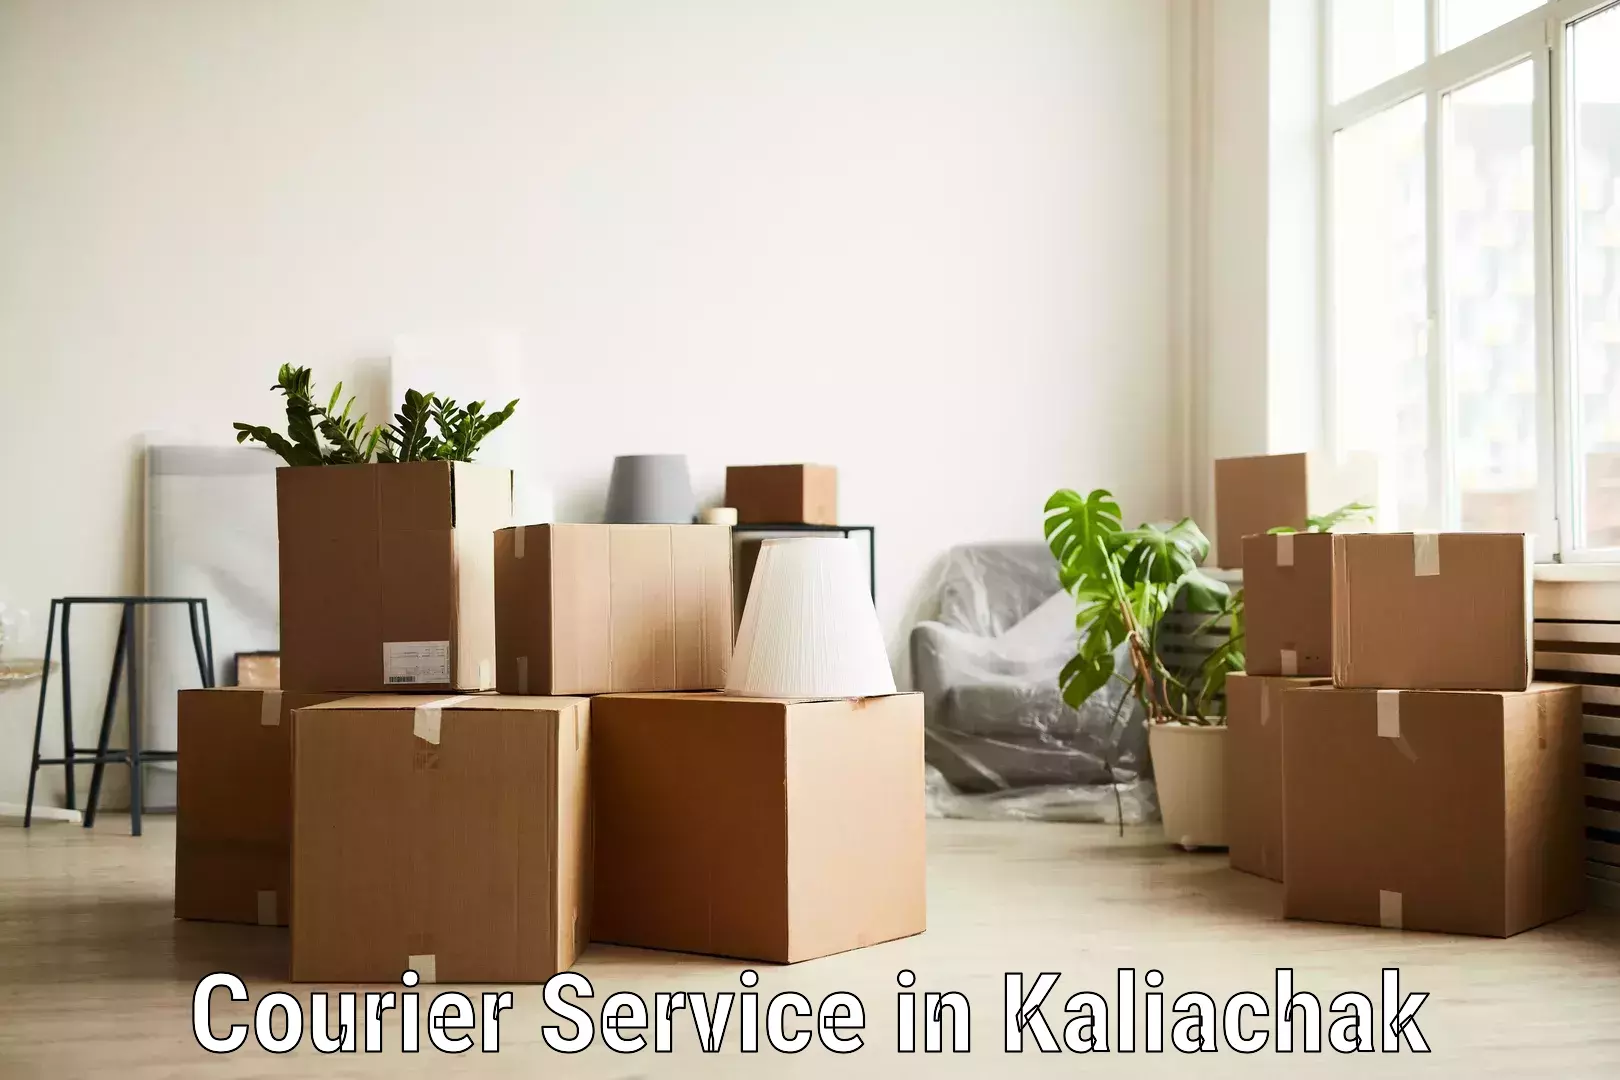 Automated parcel services in Kaliachak